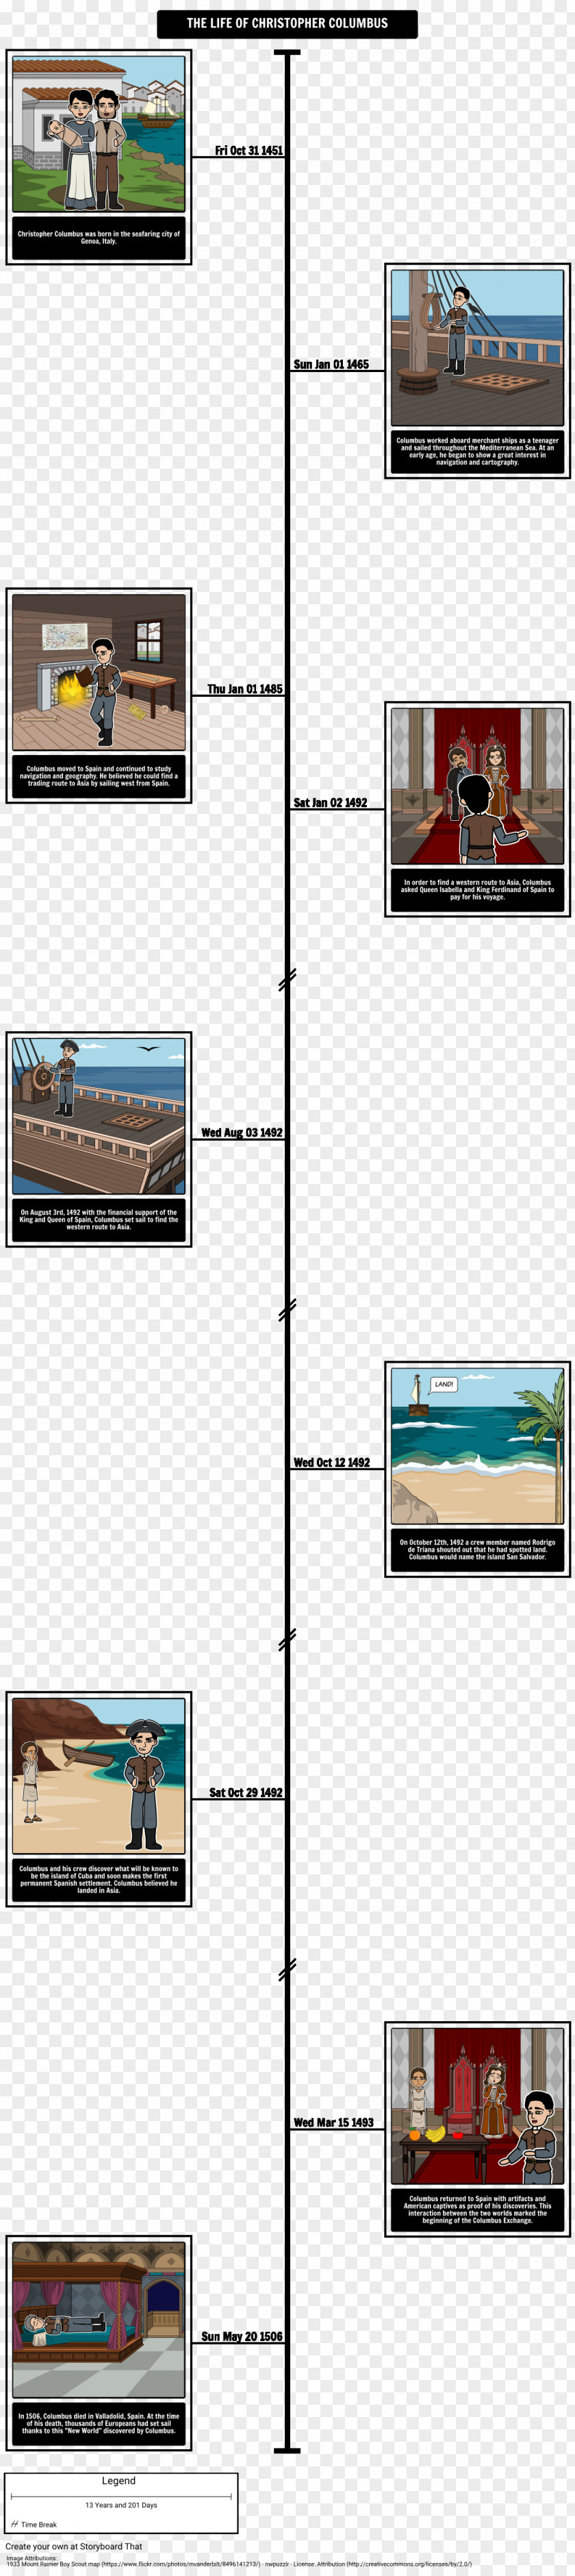 Timeline Voyages Of Christopher Columbus Age Discovery Exploration Americas PNG